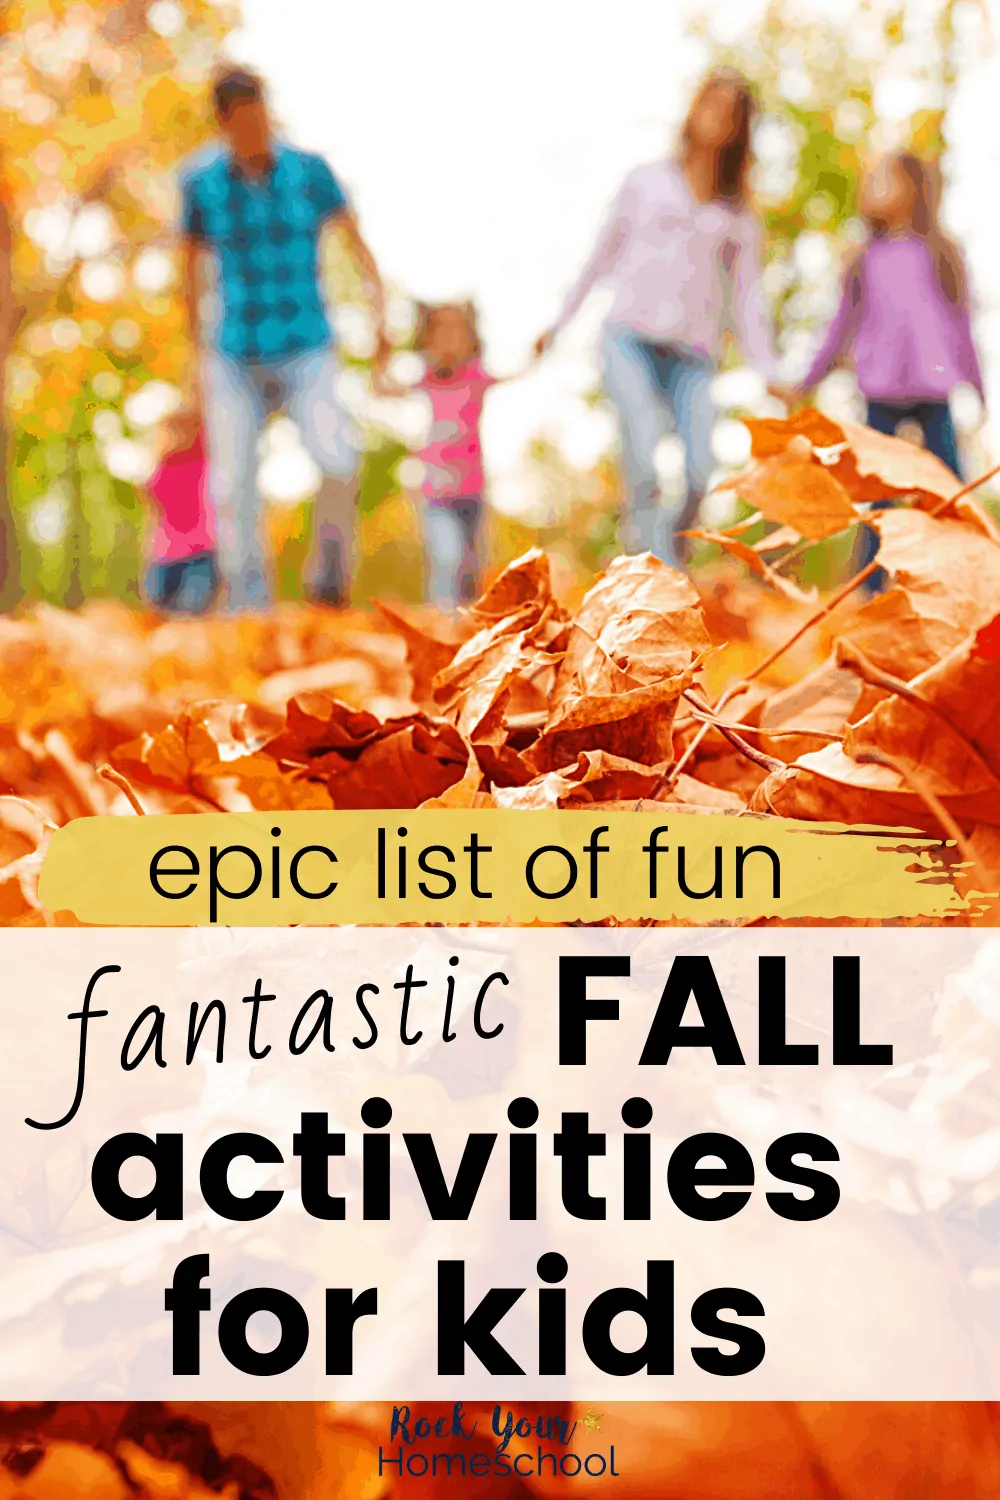 An Epic List of Fantastic Fun Fall Activities for Kids